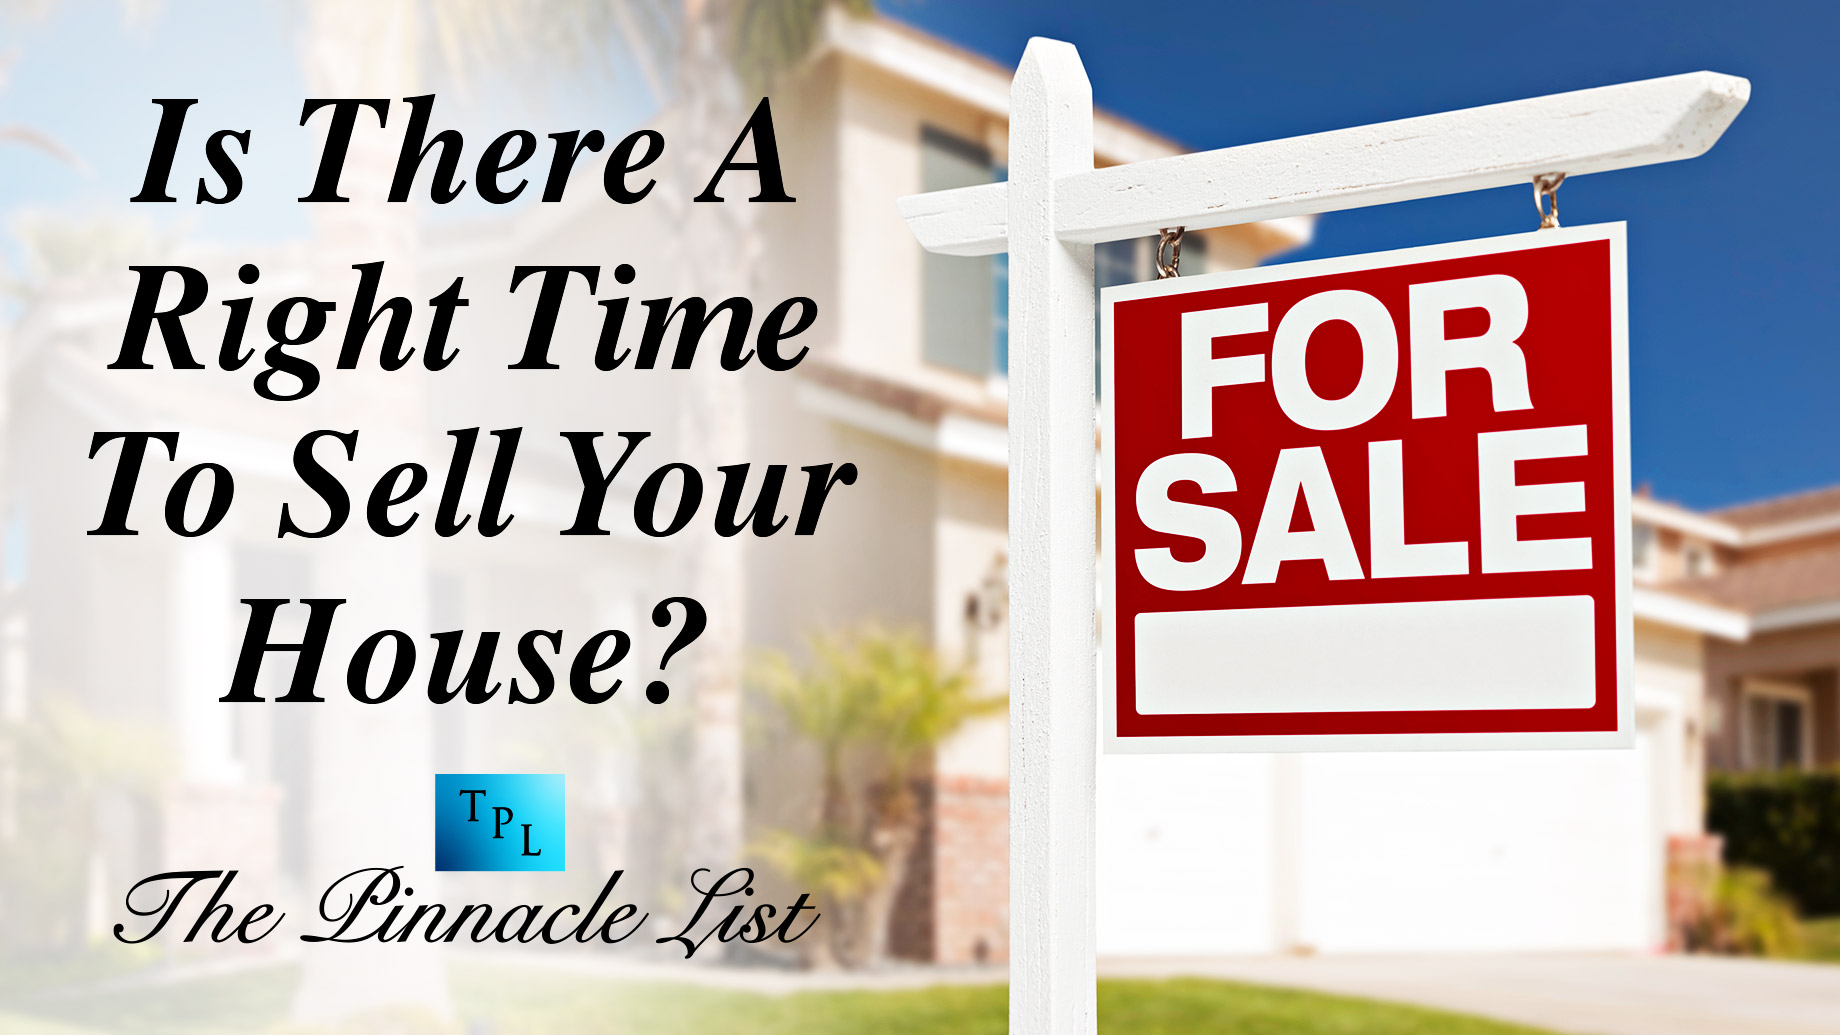 Is There A Right Time To Sell Your House?